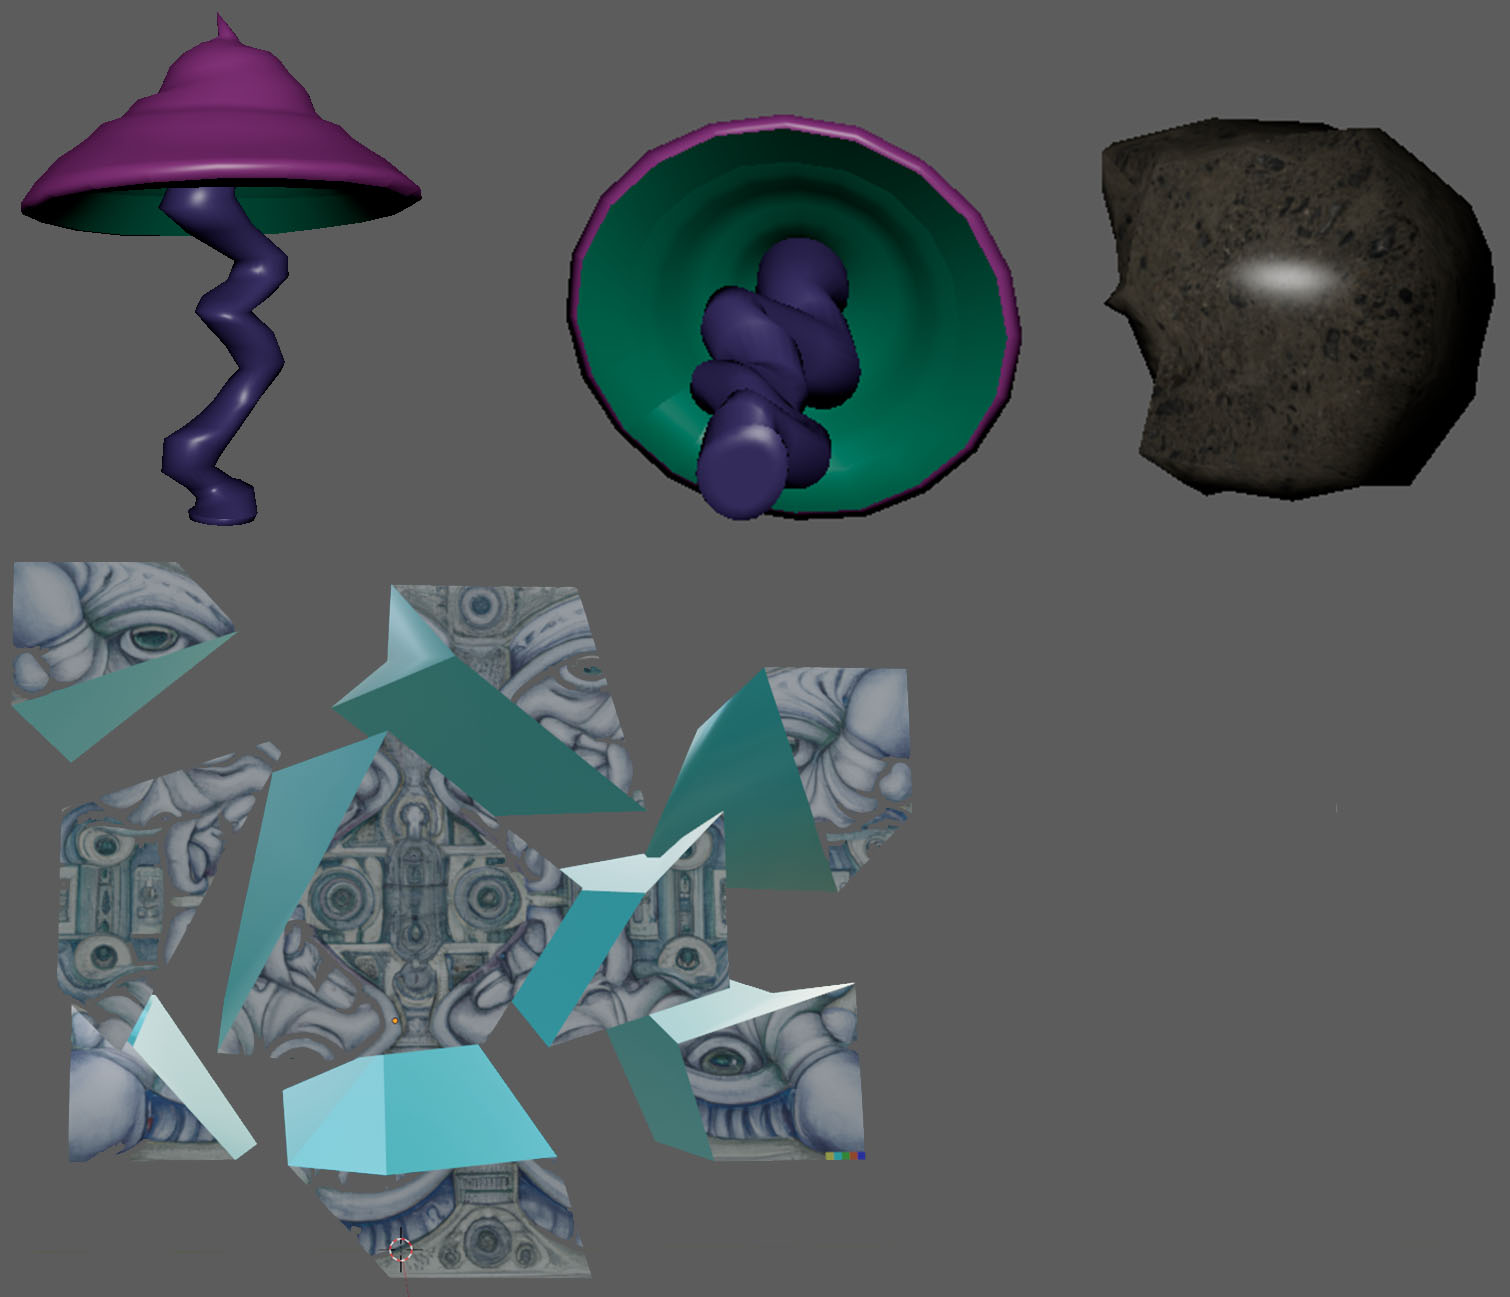 Modeling mushroom, asteroid and insight pieces